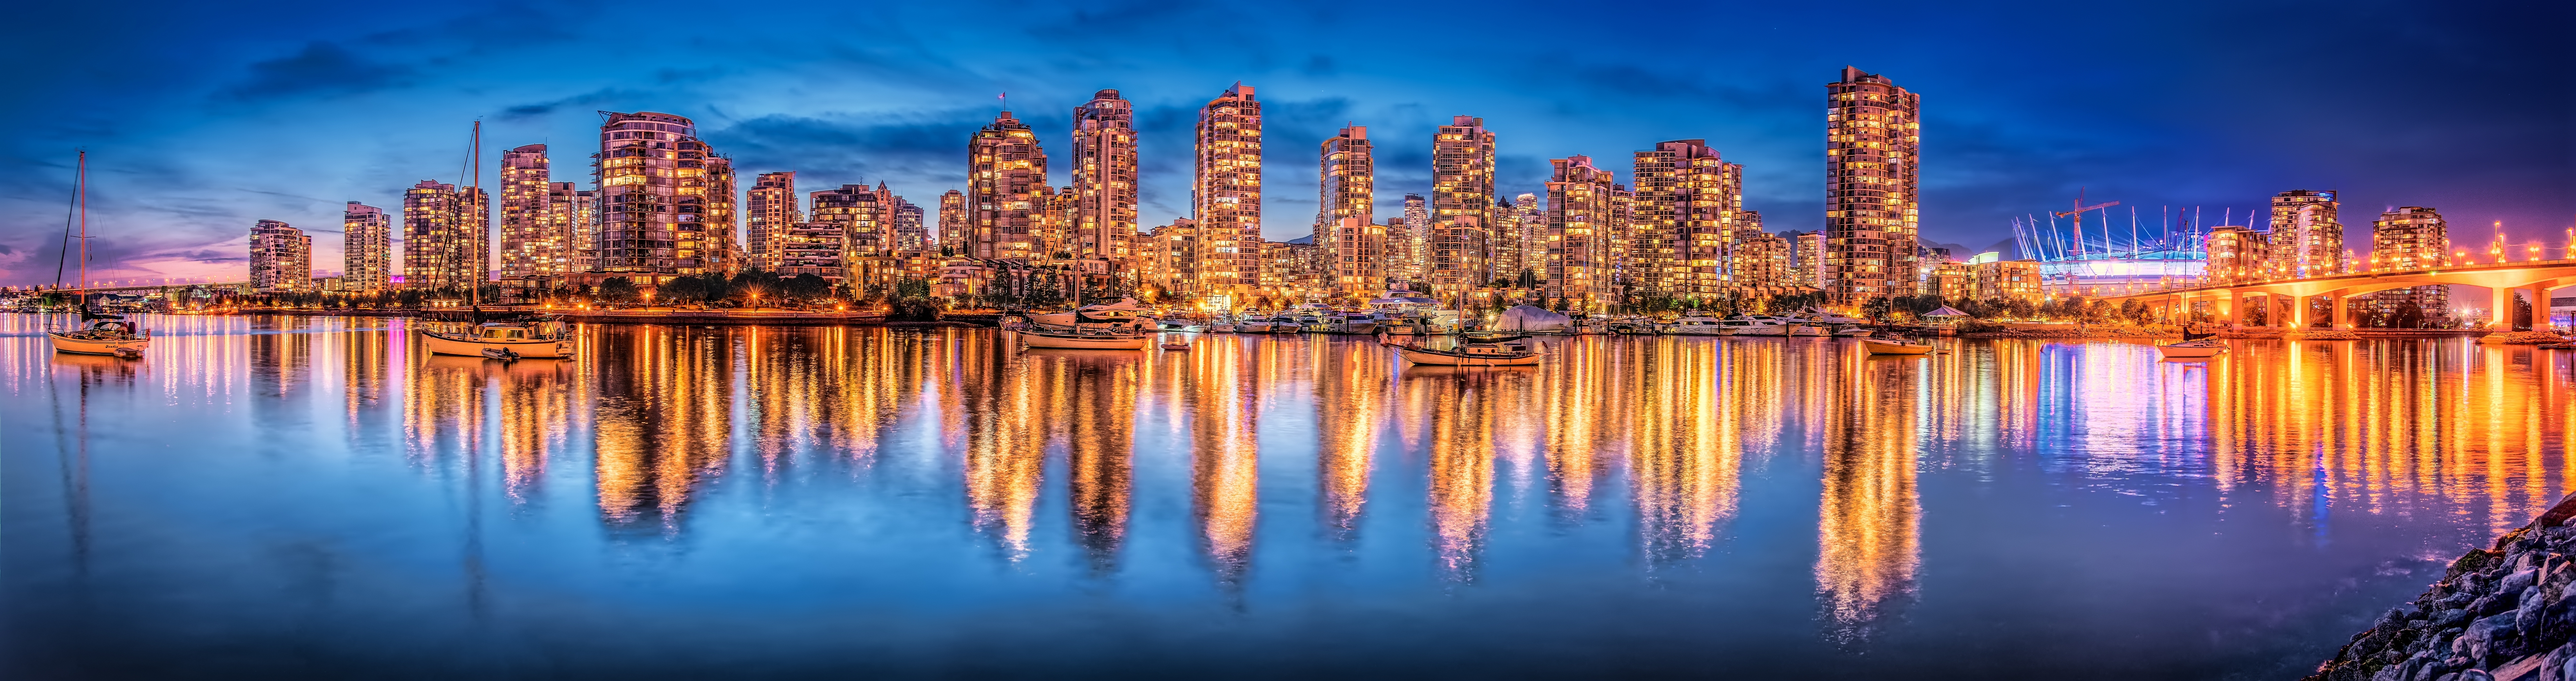 vancouver, man made, british columbia, building, canada, city, night, panorama, reflection, skyscraper, cities QHD